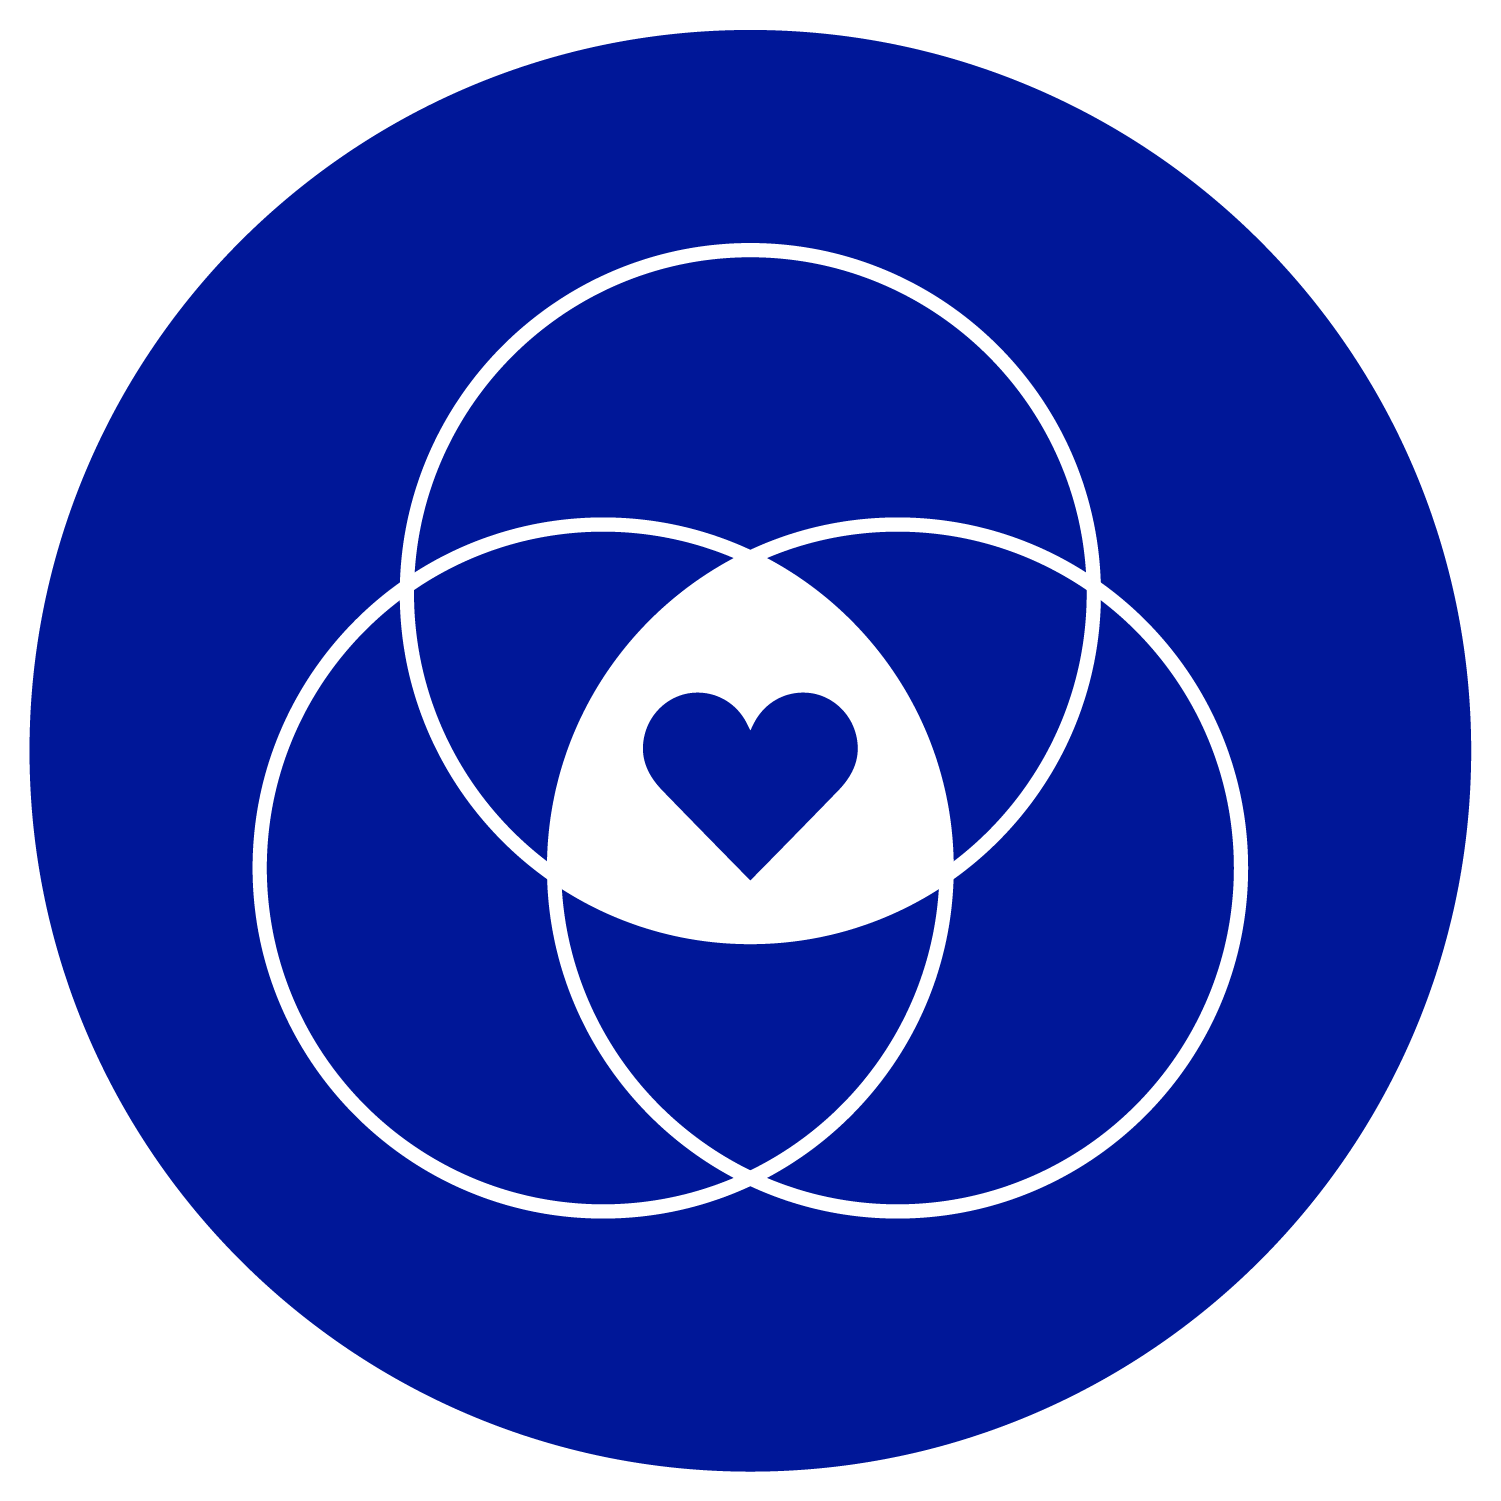 icon of 3 circles overlapping on another and a heart in the middle